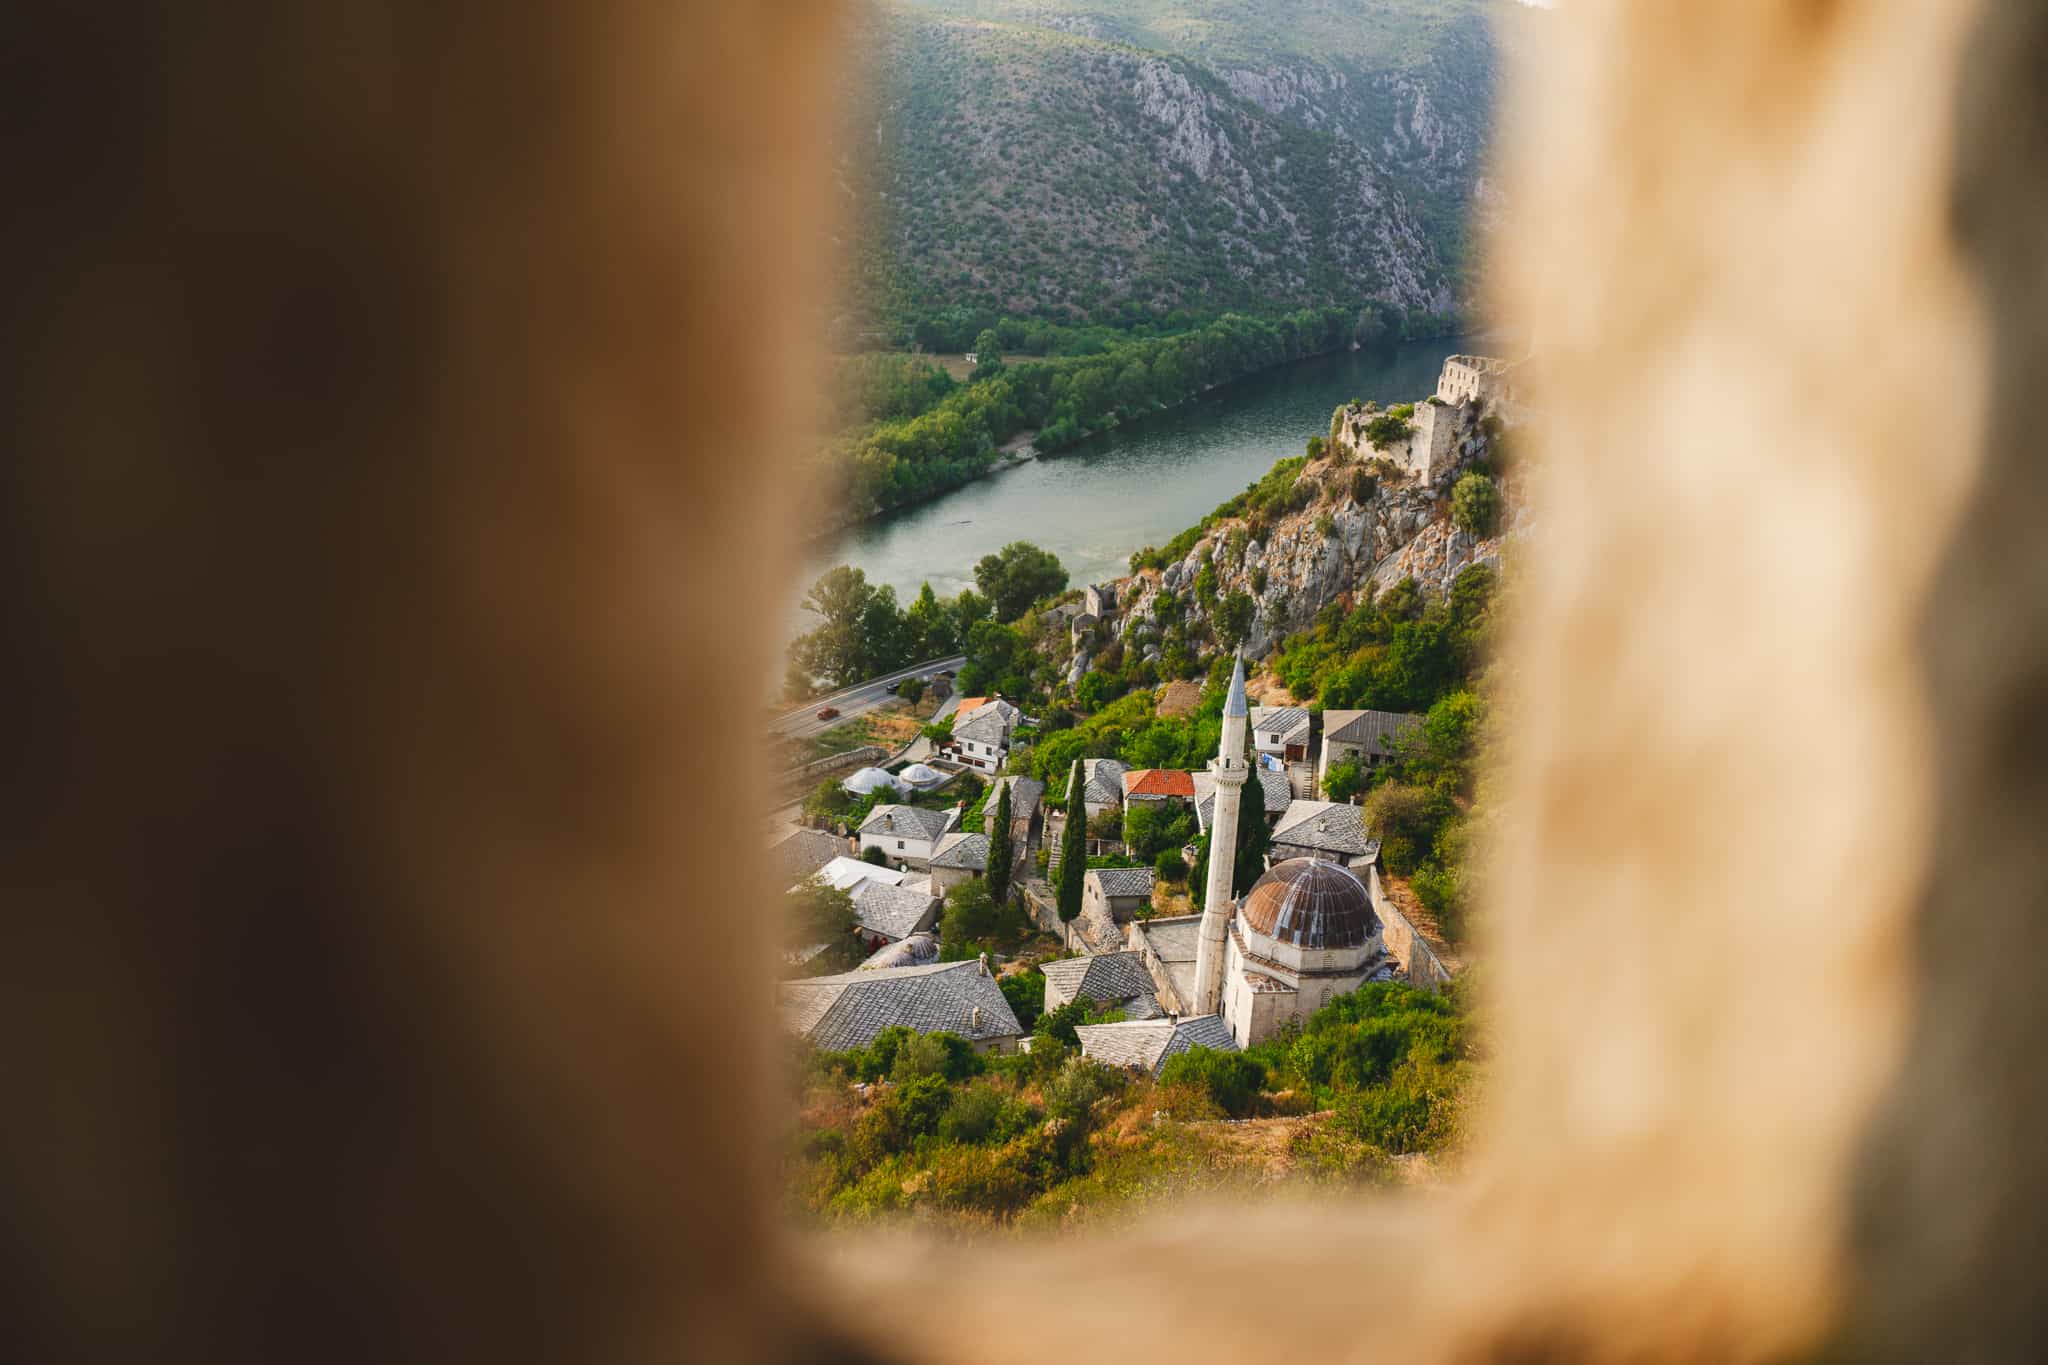 The buildings in the hillside surrounding Stjepan Grad - Blagaj Castle shot through a slit in the walls of the castle